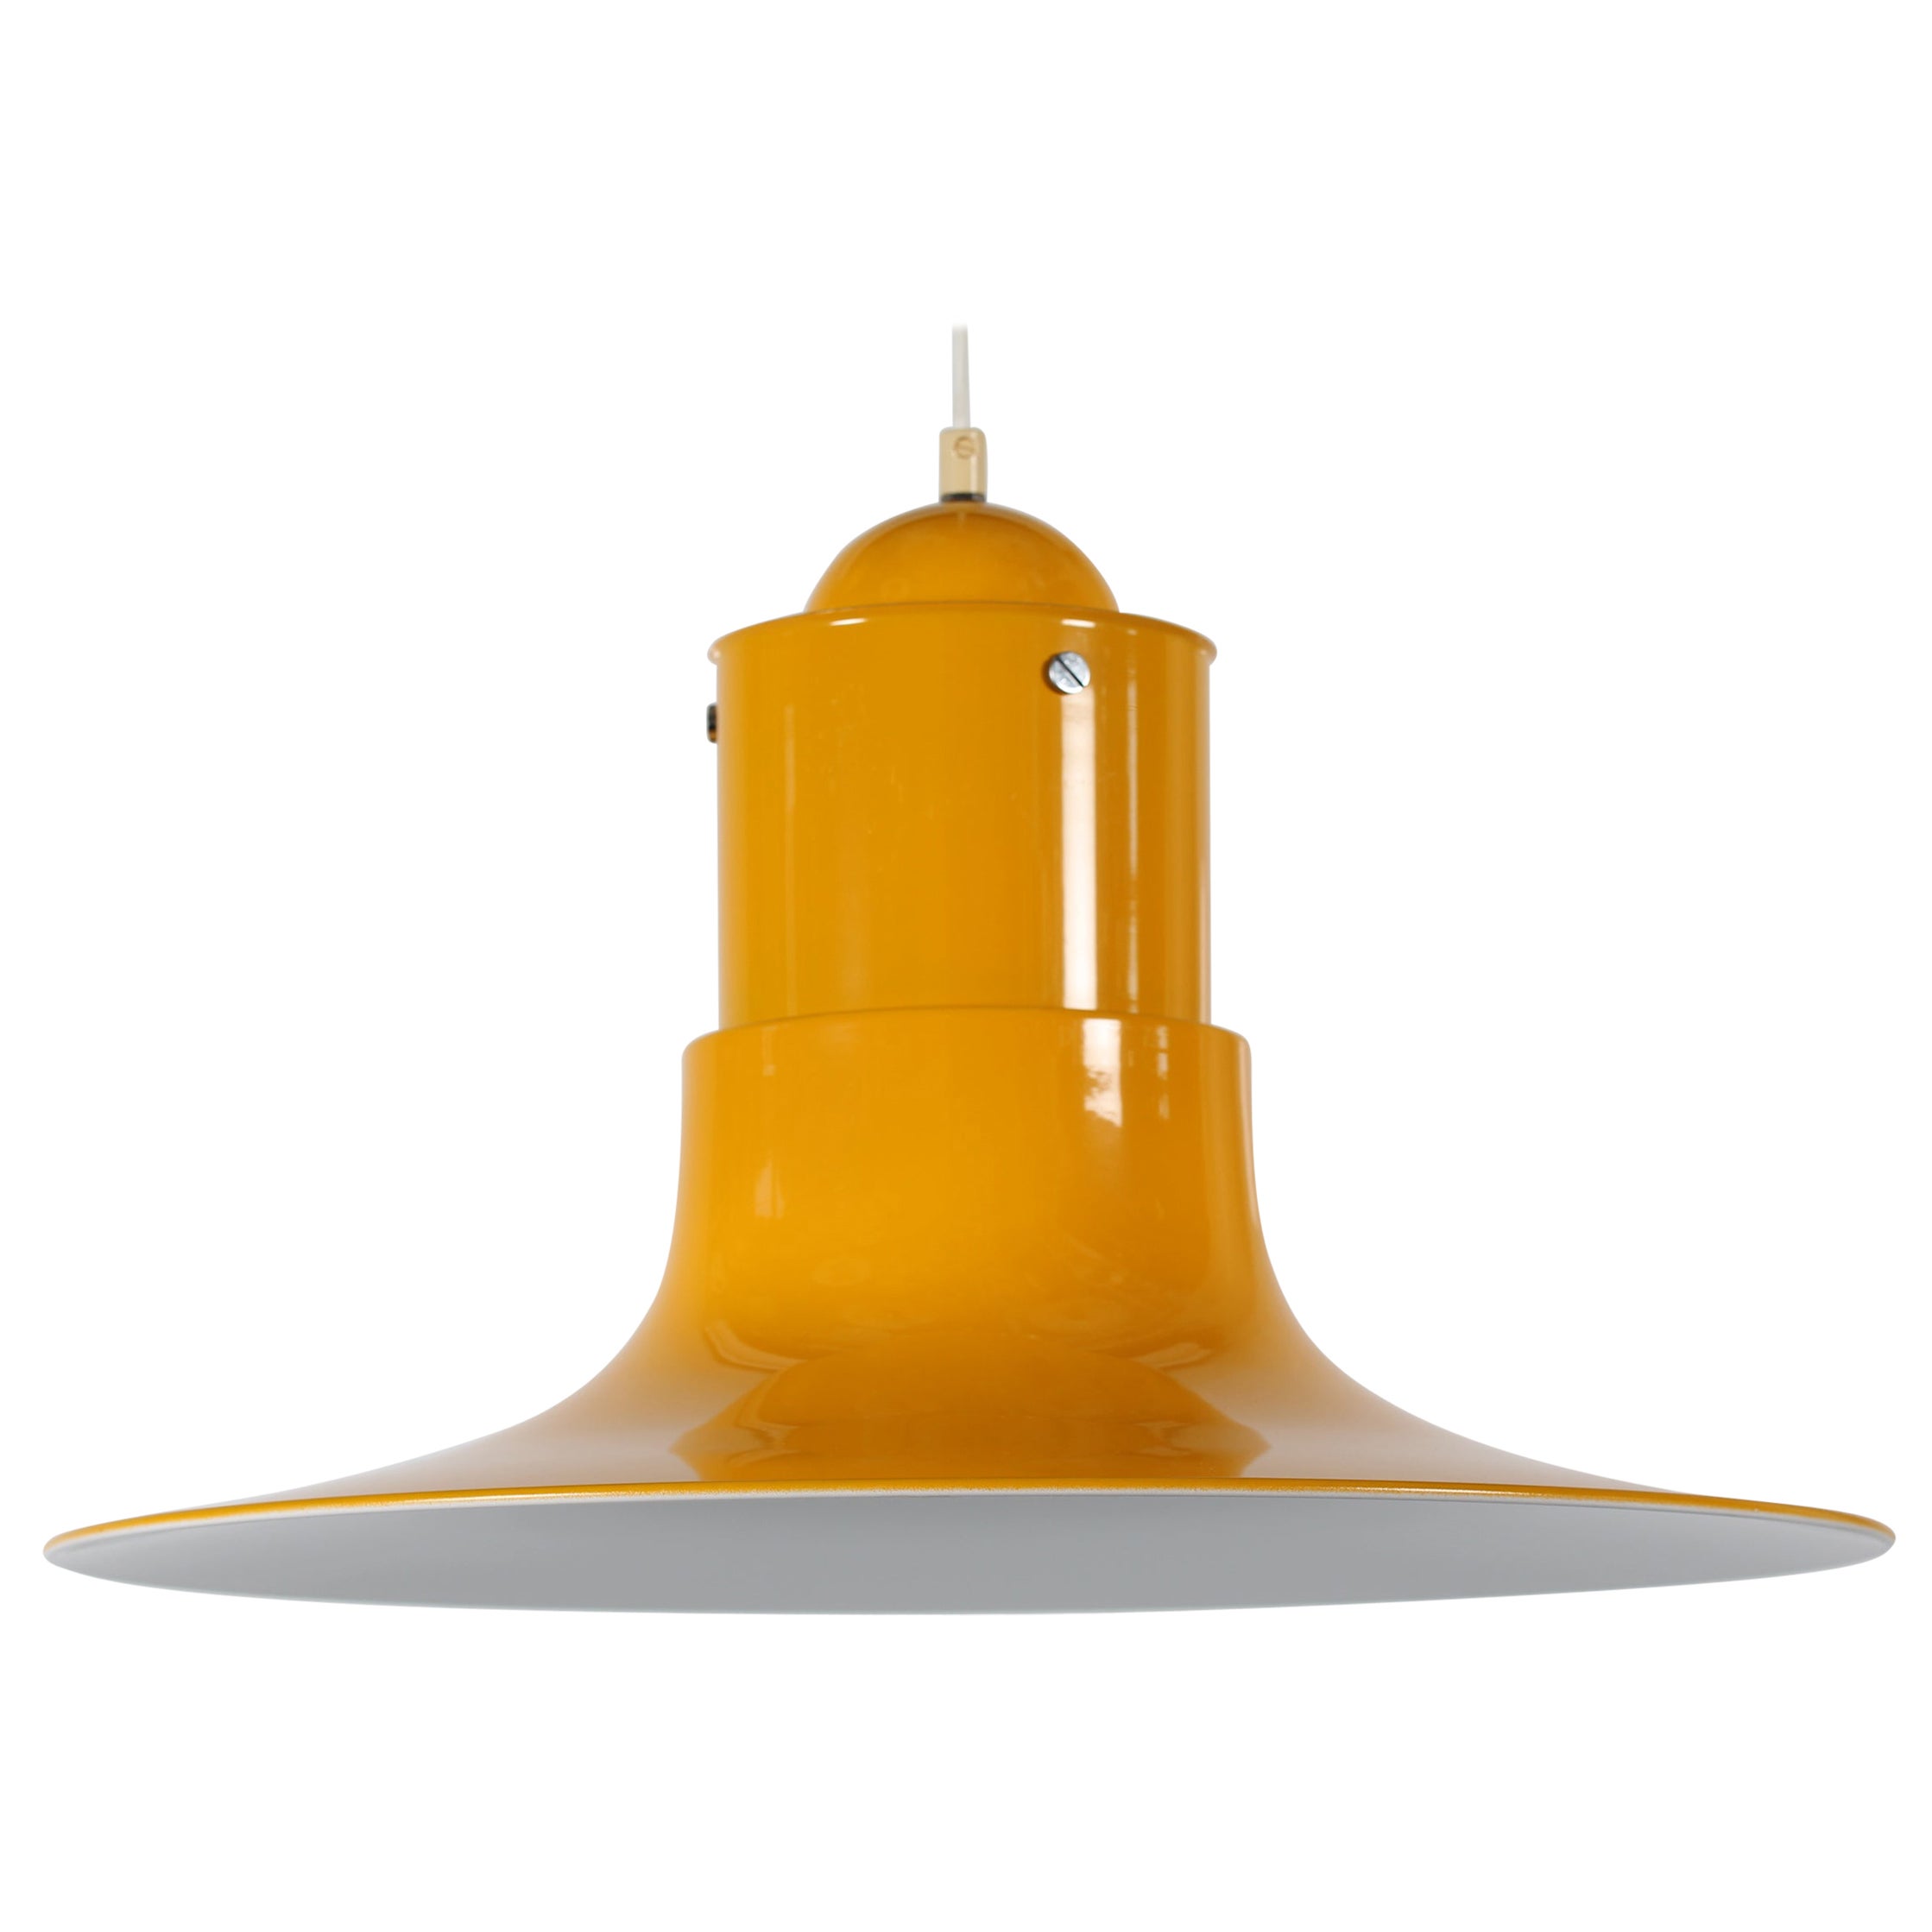 Large Swedish Pendant Light Cyklon by P. O. Ström with Yellow Lacquer, 1970s For Sale